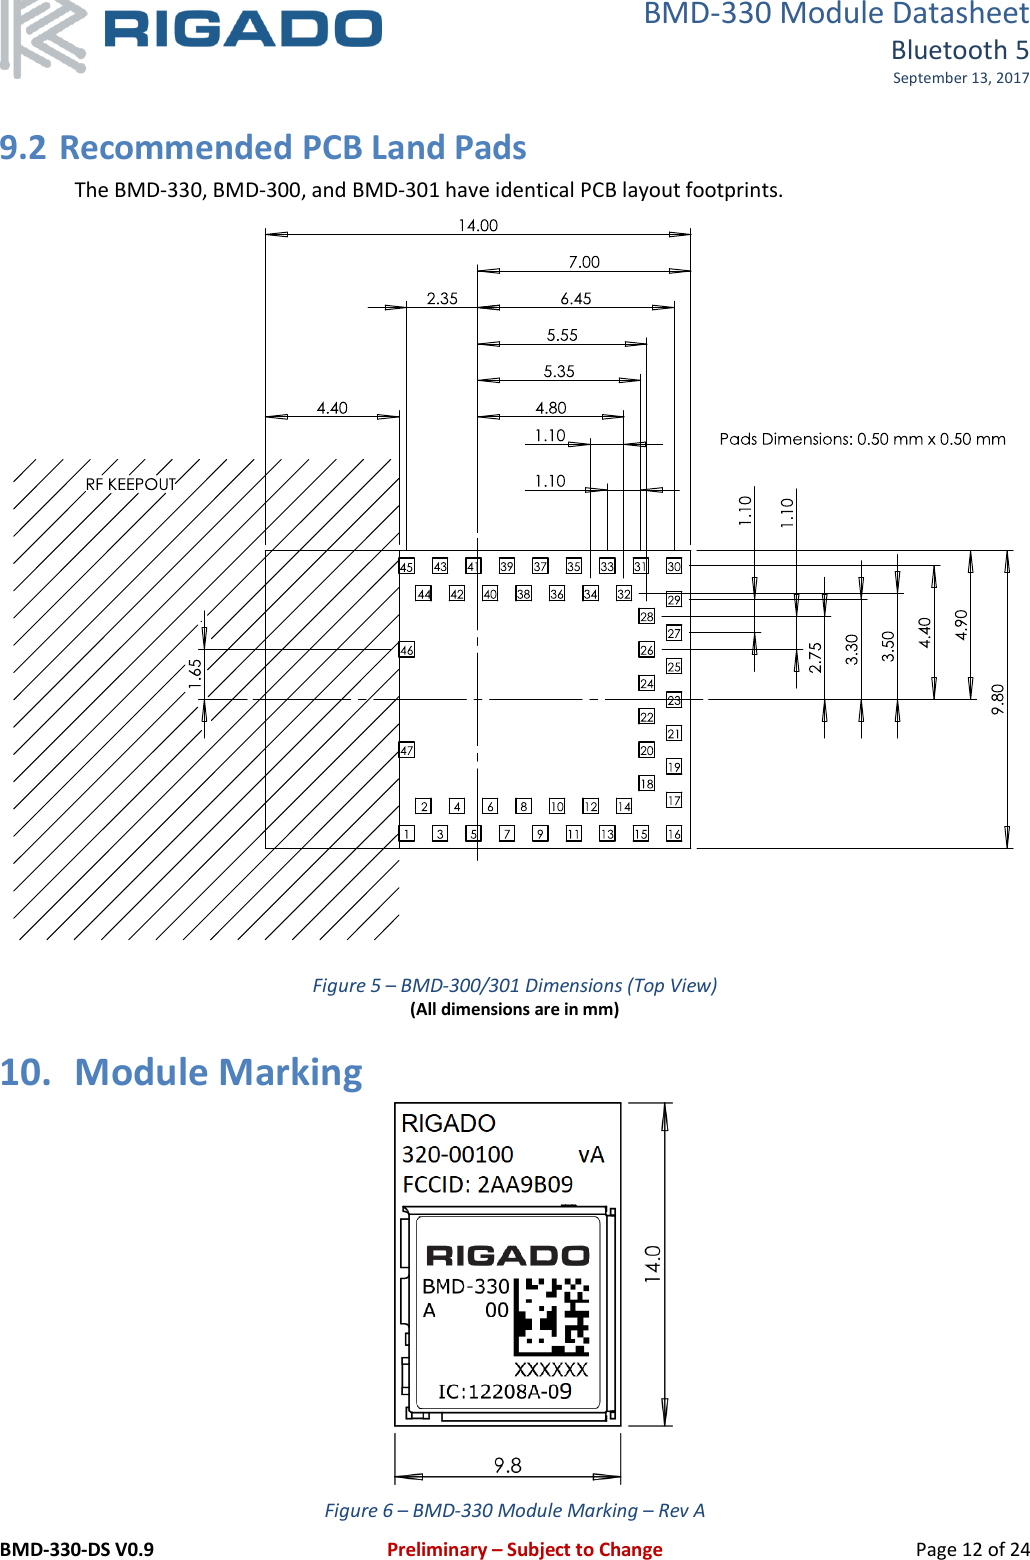 BMD-330 Module Datasheet Bluetooth 5 September 13, 2017 BMD-330-DS V0.9     Preliminary – Subject to Change   Page 12 of 24  9.2 Recommended PCB Land Pads The BMD-330, BMD-300, and BMD-301 have identical PCB layout footprints.  Figure 5 – BMD-300/301 Dimensions (Top View) (All dimensions are in mm) 10. Module Marking  Figure 6 – BMD-330 Module Marking – Rev A 